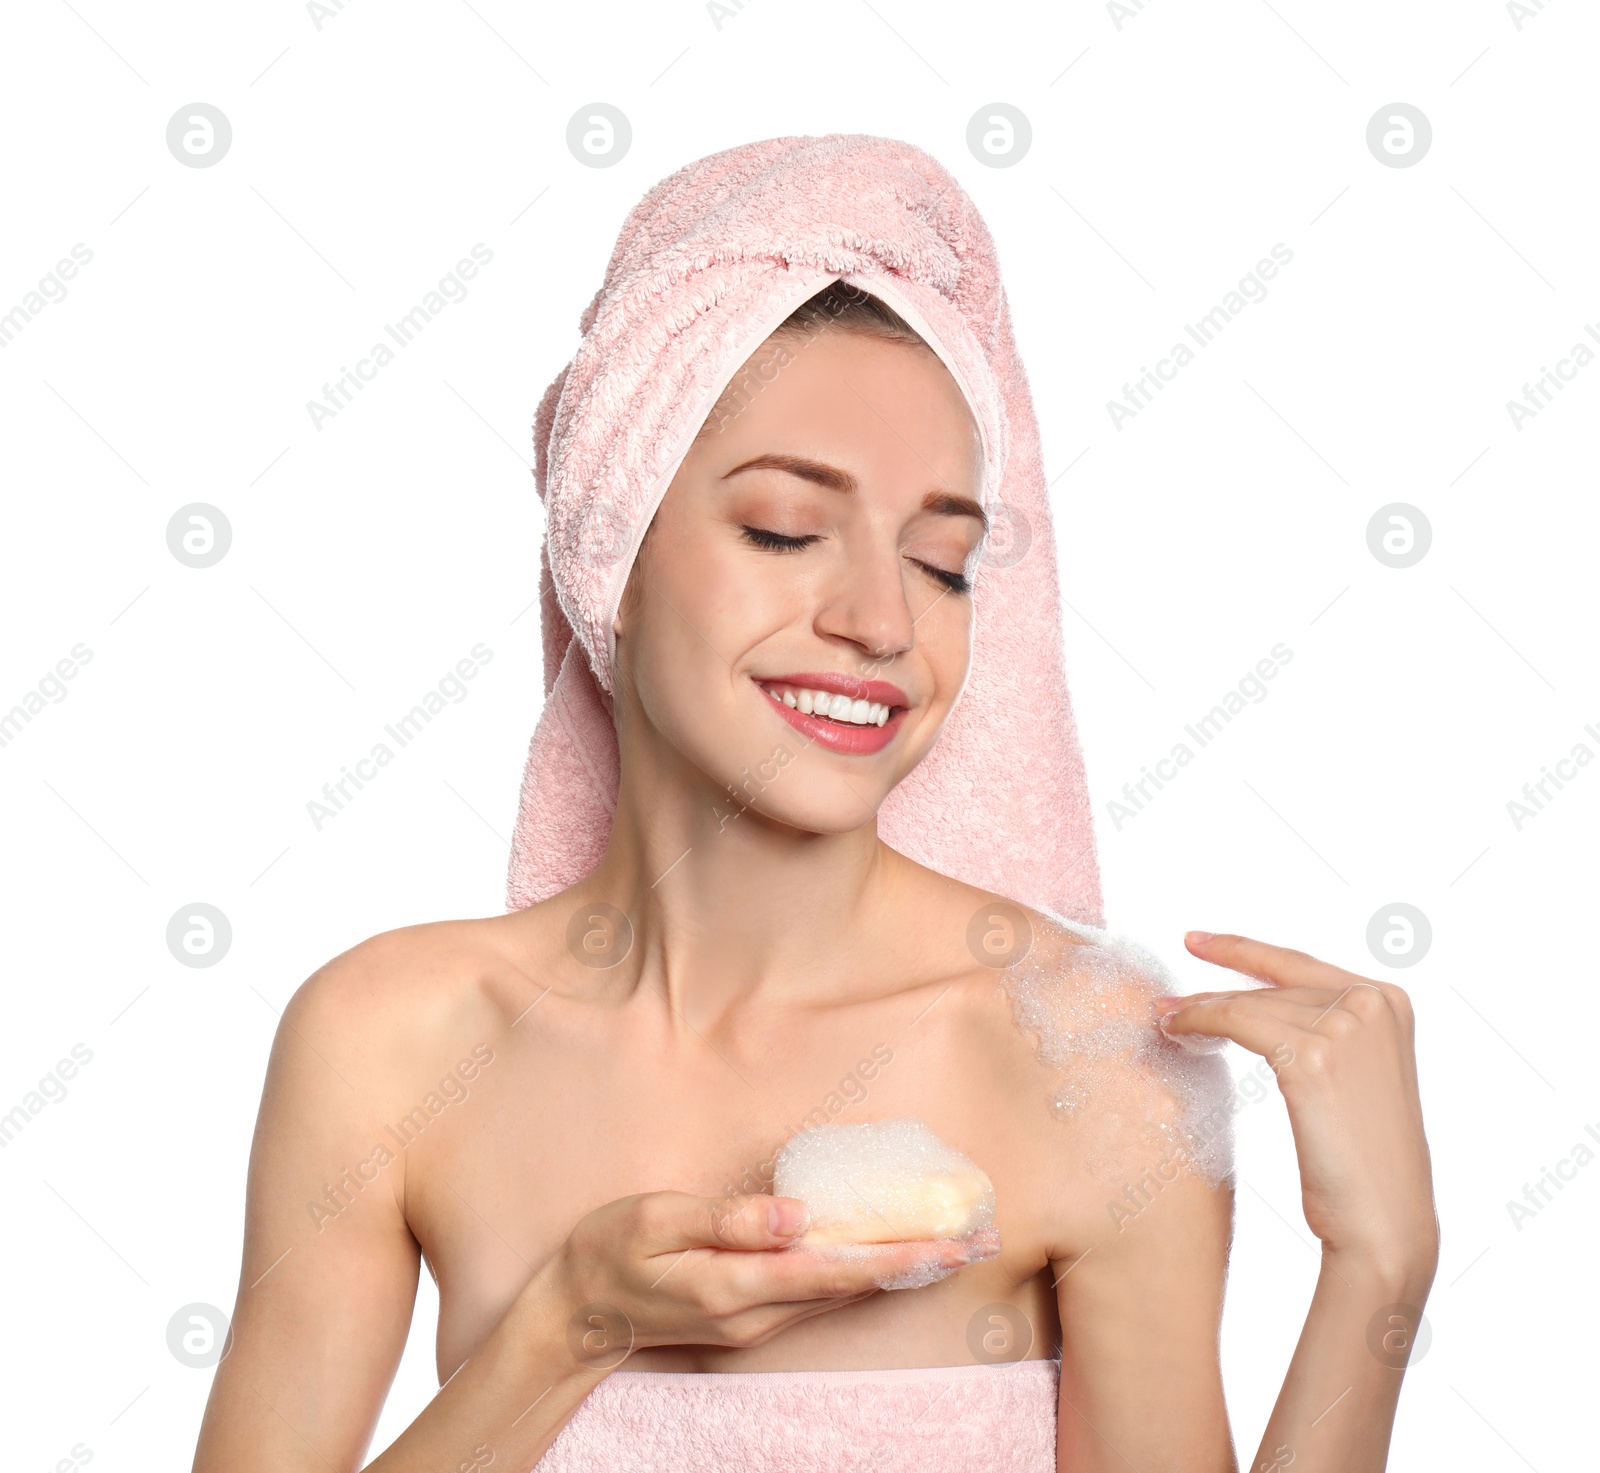 Image of Young woman washing body with soap bar on white background